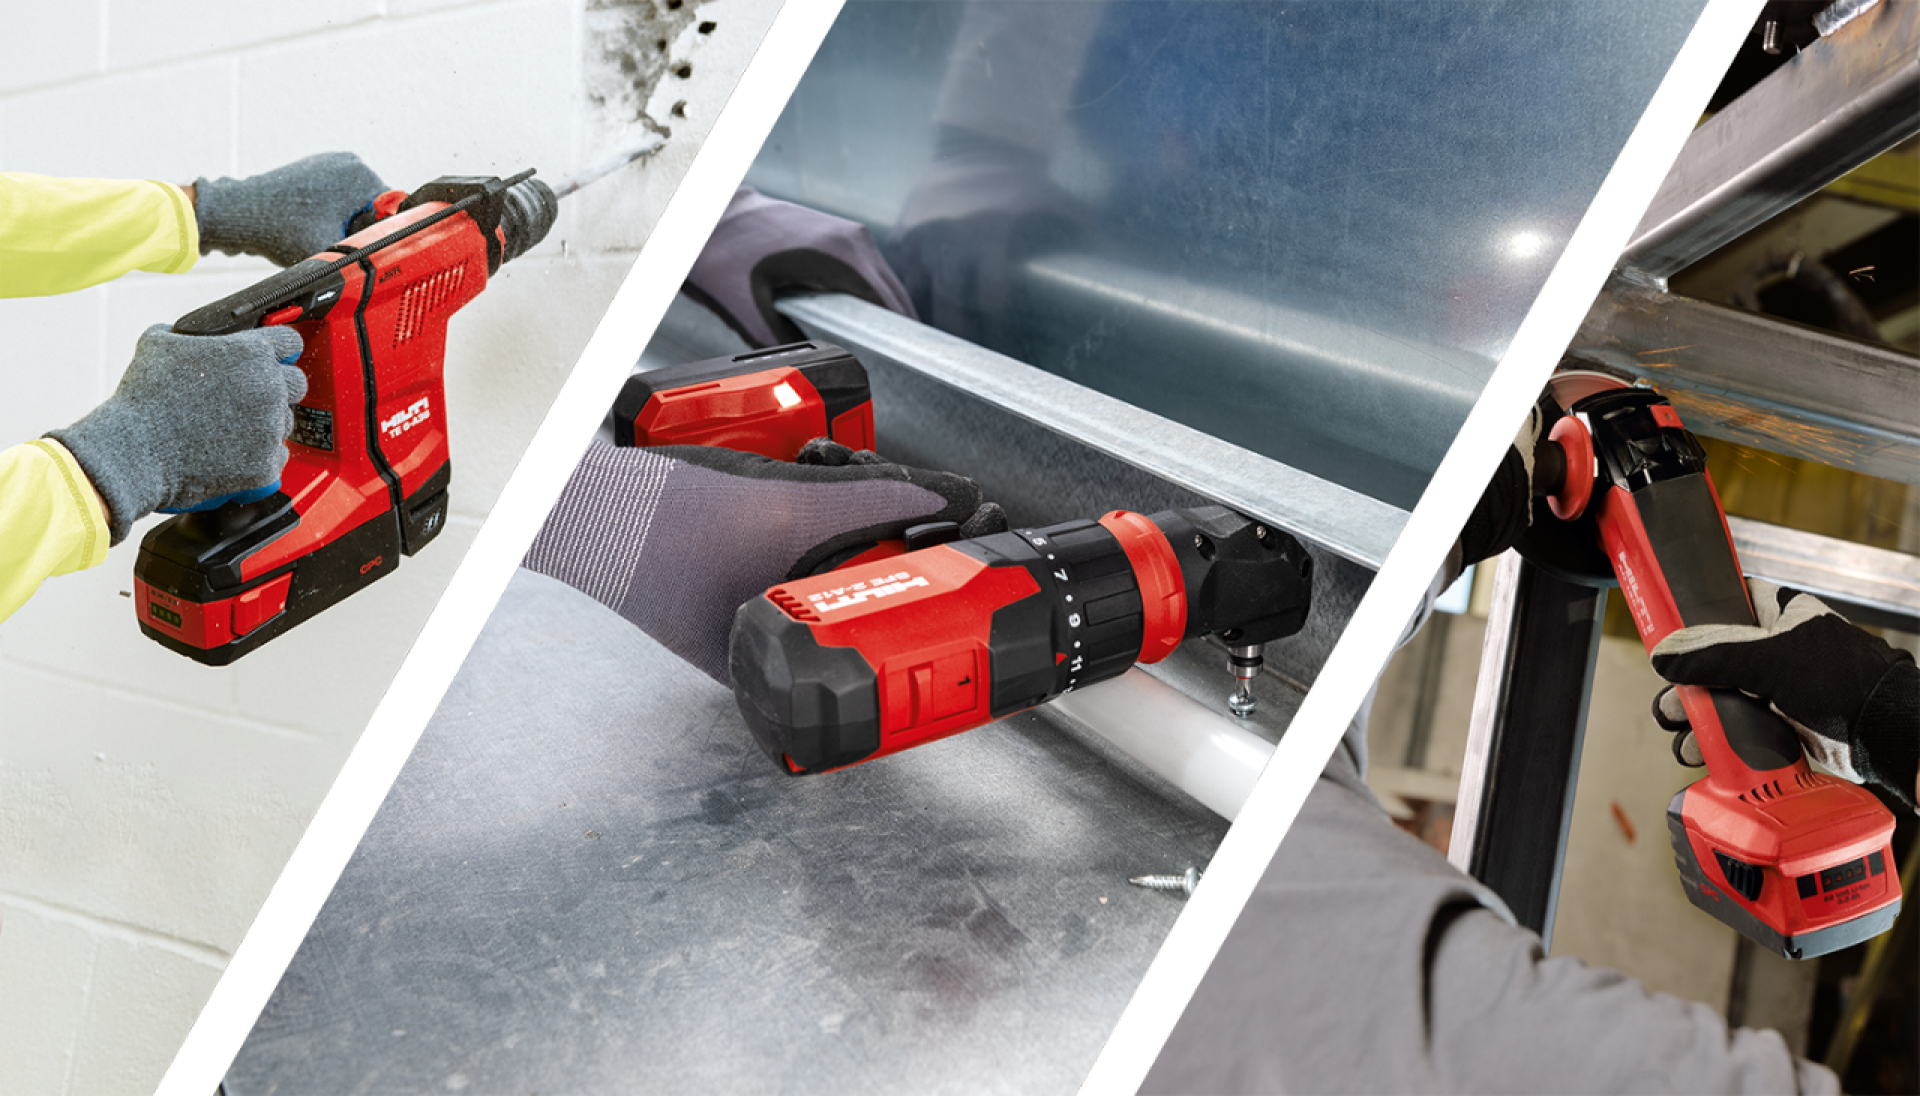 Different Hilti cordless tools being used in three different applications